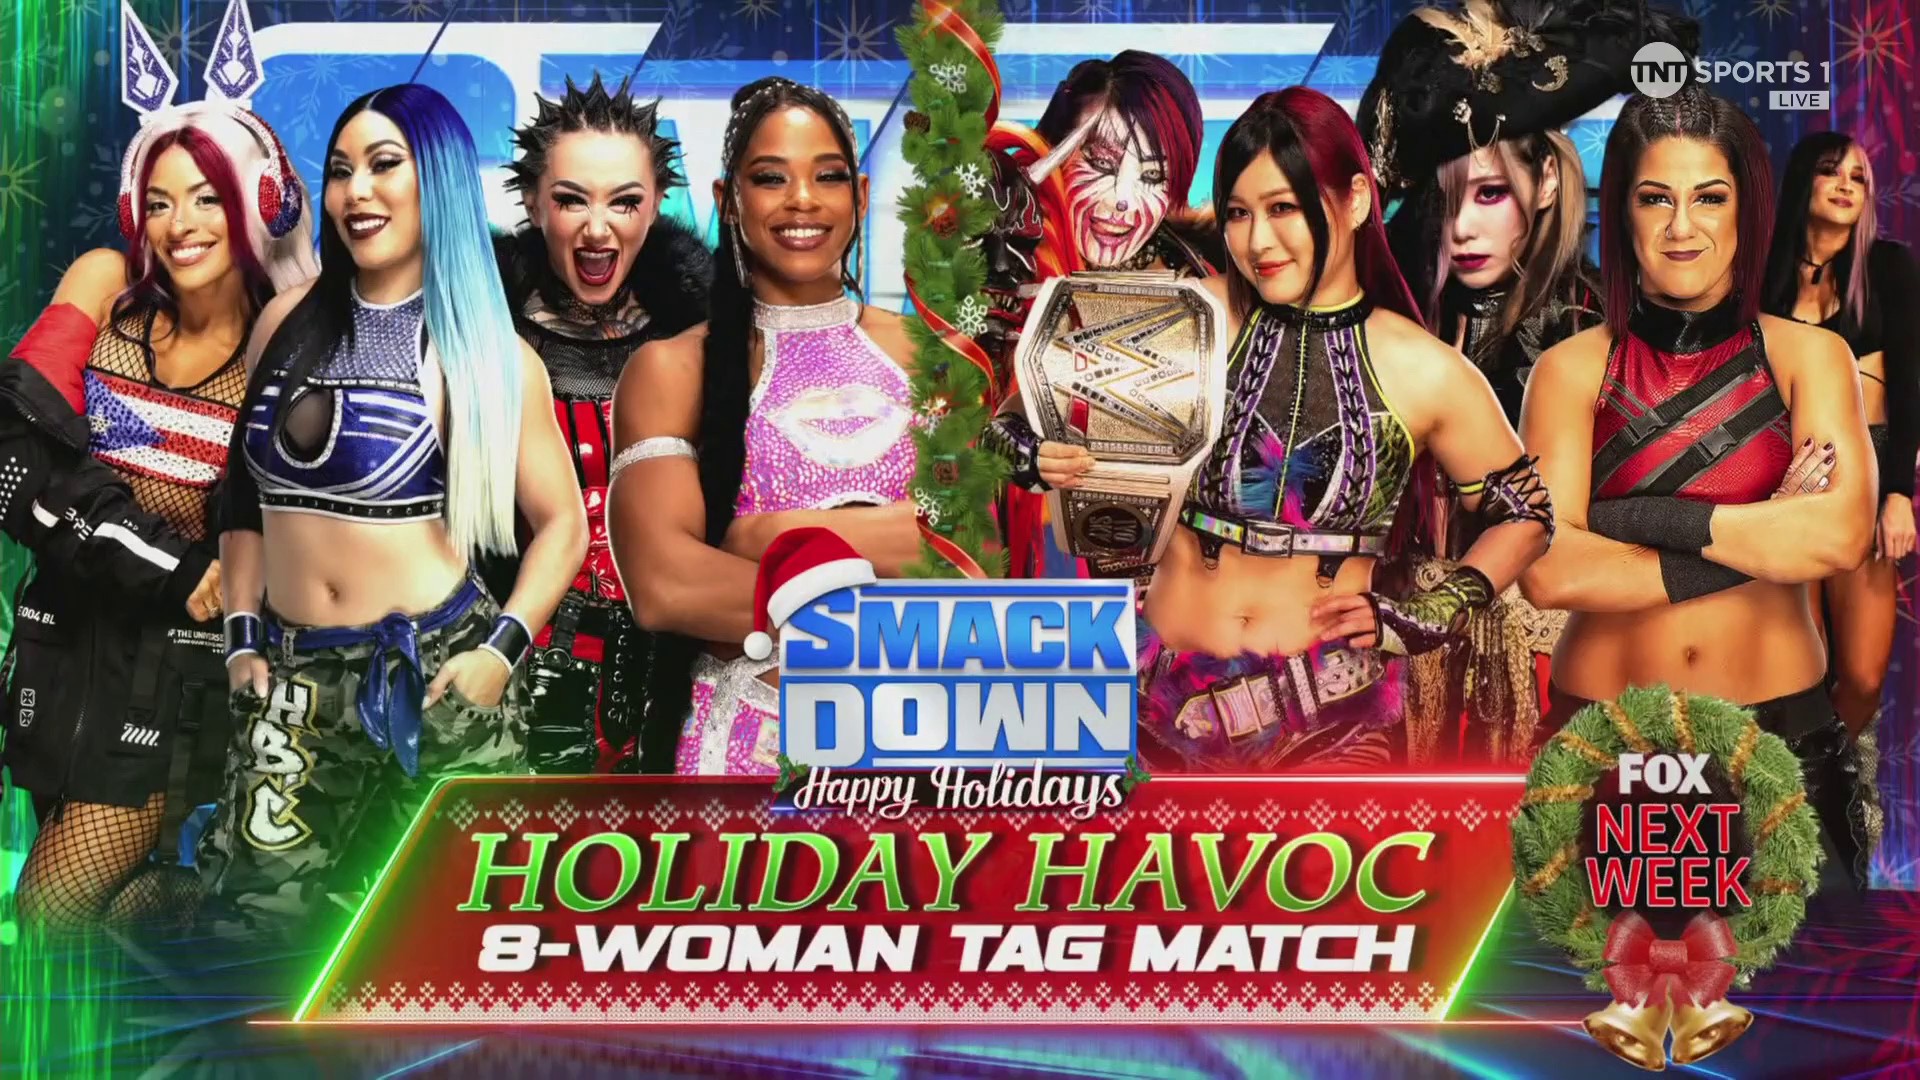 WWE SmackDown match graphic advertising the "Holiday Havoc" 8-Woman Tag Team Match.